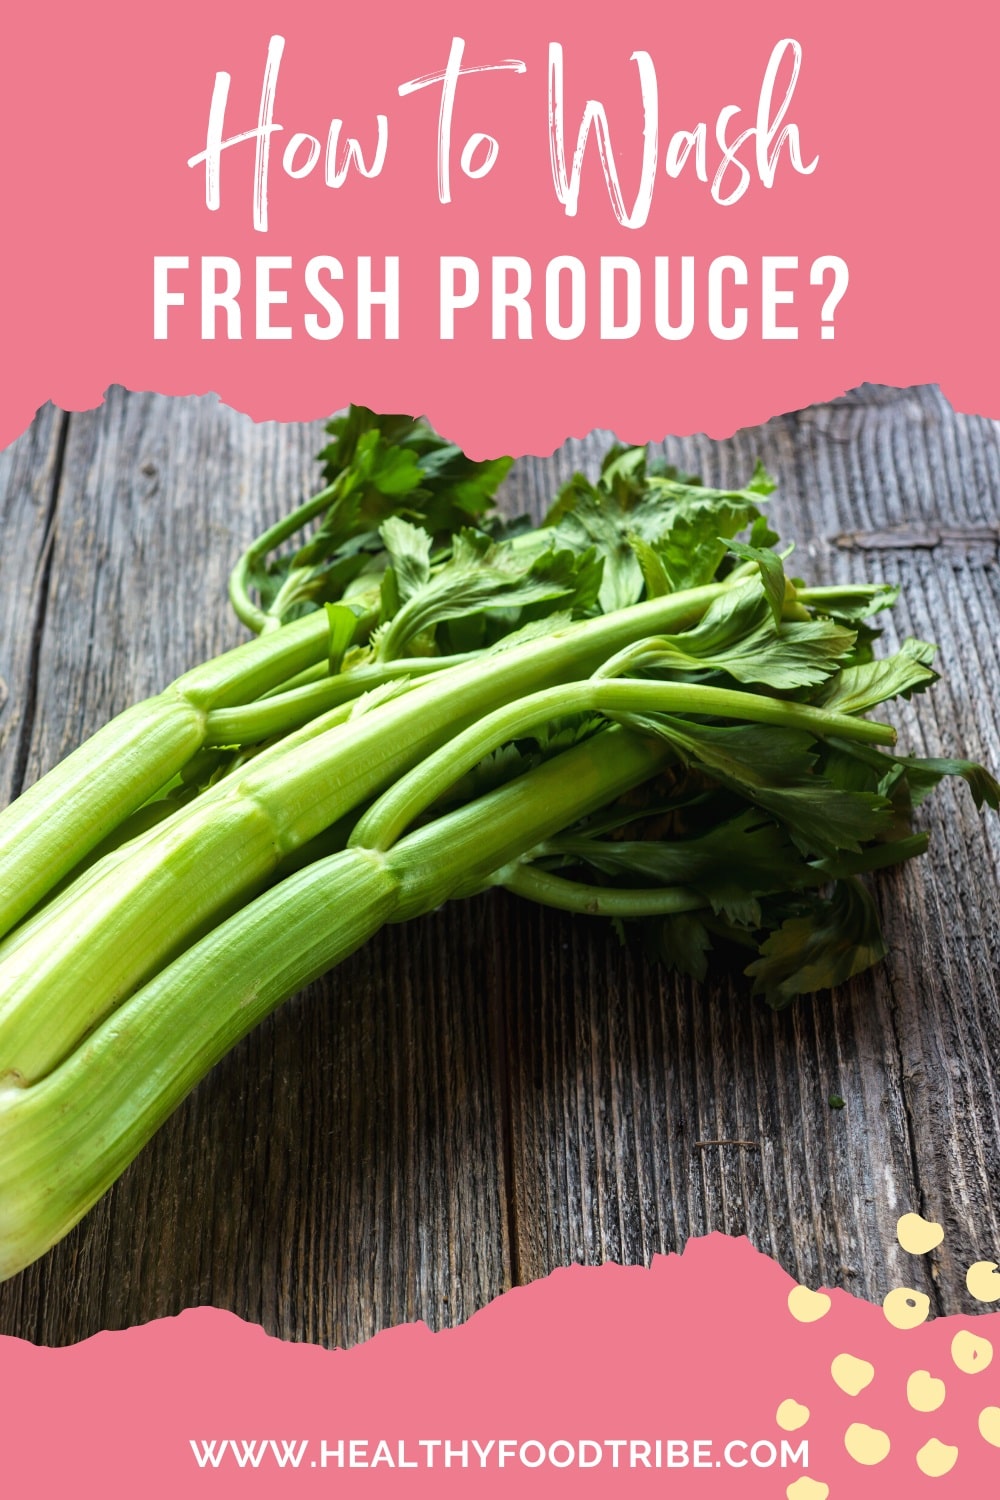 How to wash fresh produce